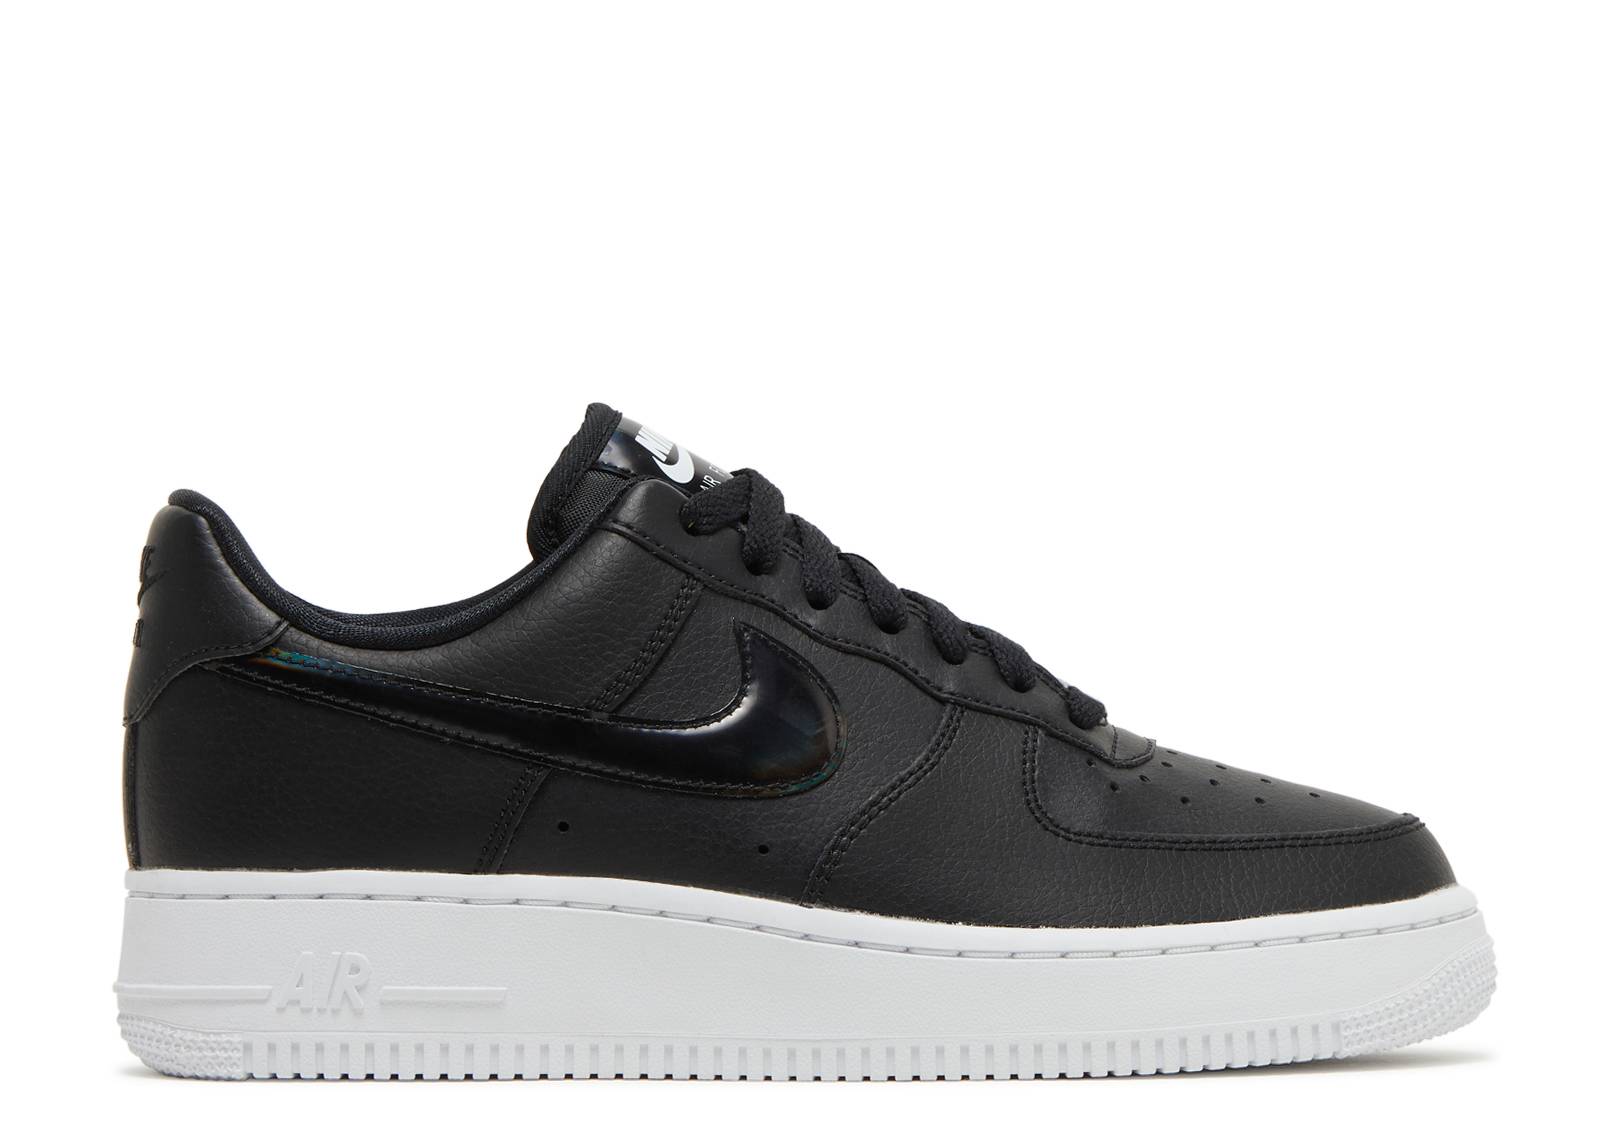 Wmns Air Force 1 Low 'Black Iridescent'